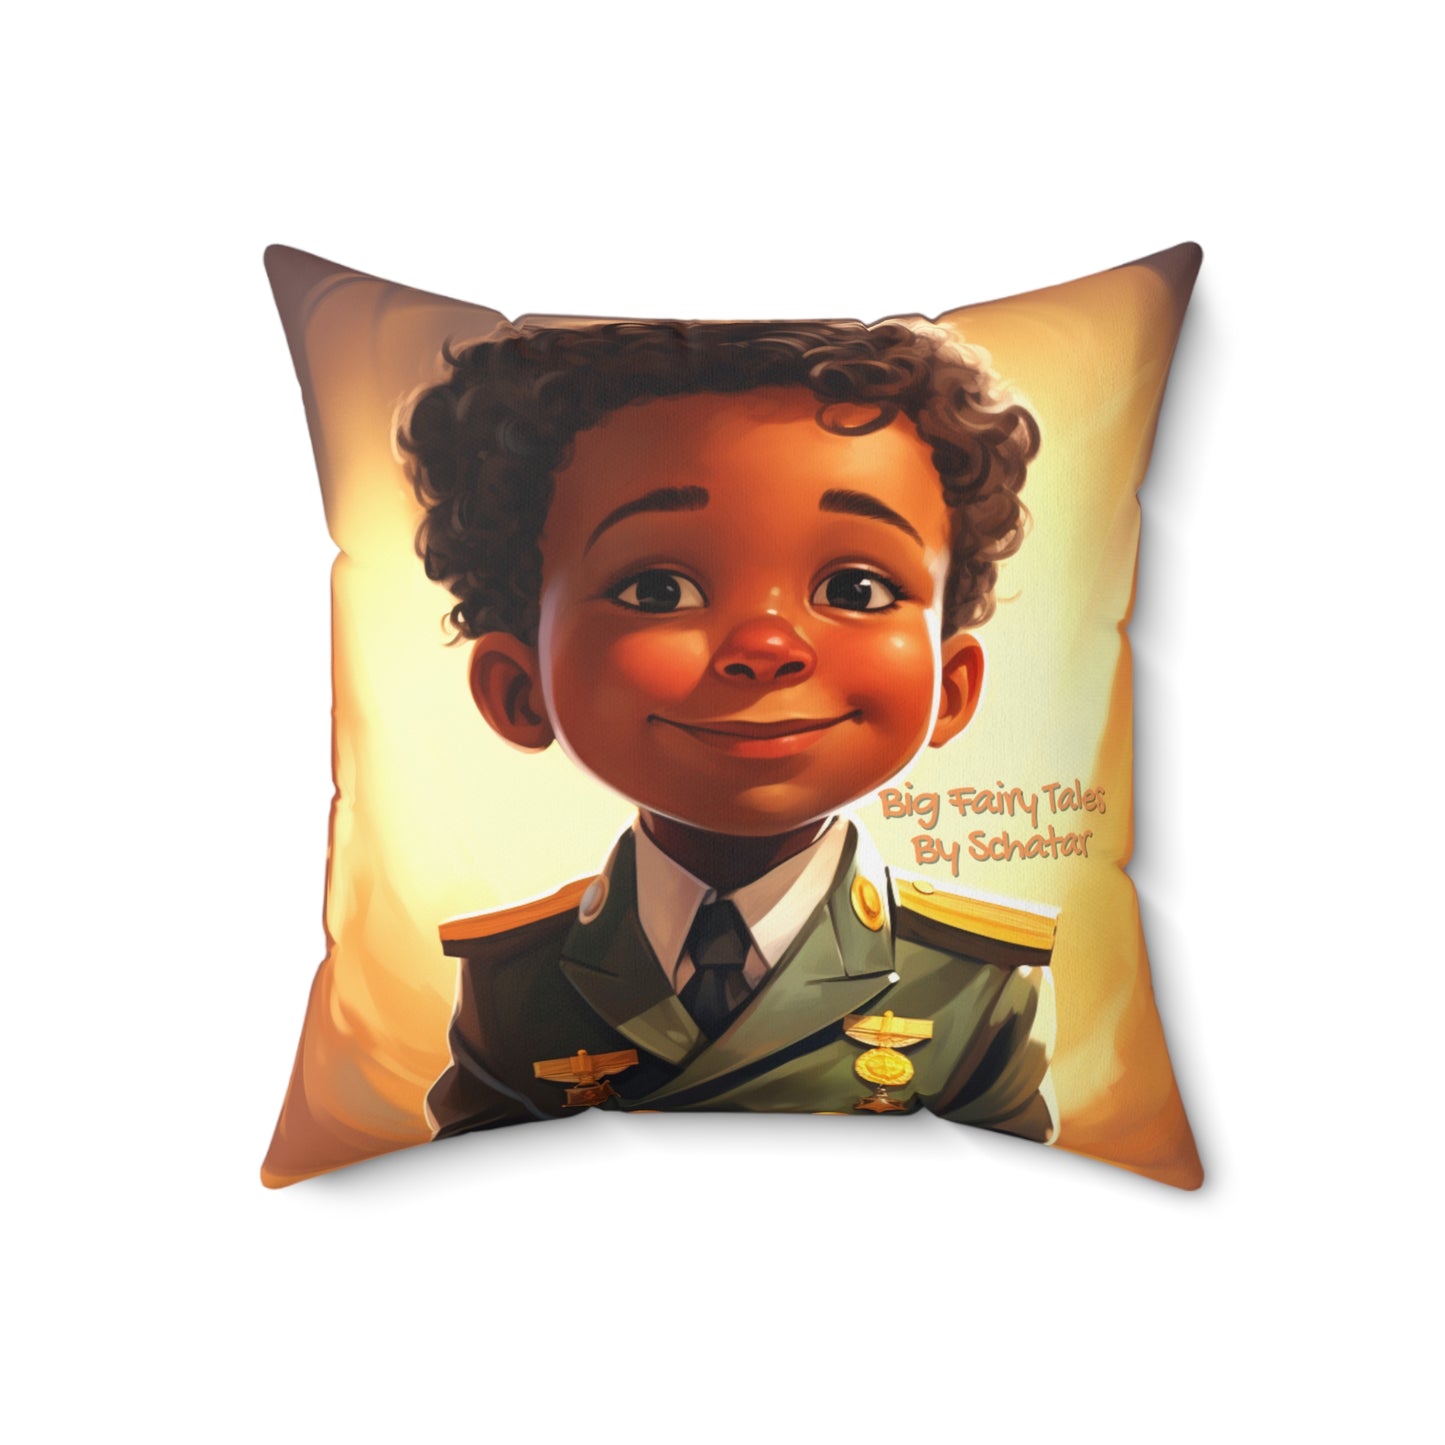 Military Officer - Big Little Professionals Plush Pillow 14 From Big Fairy Tales By Schatar